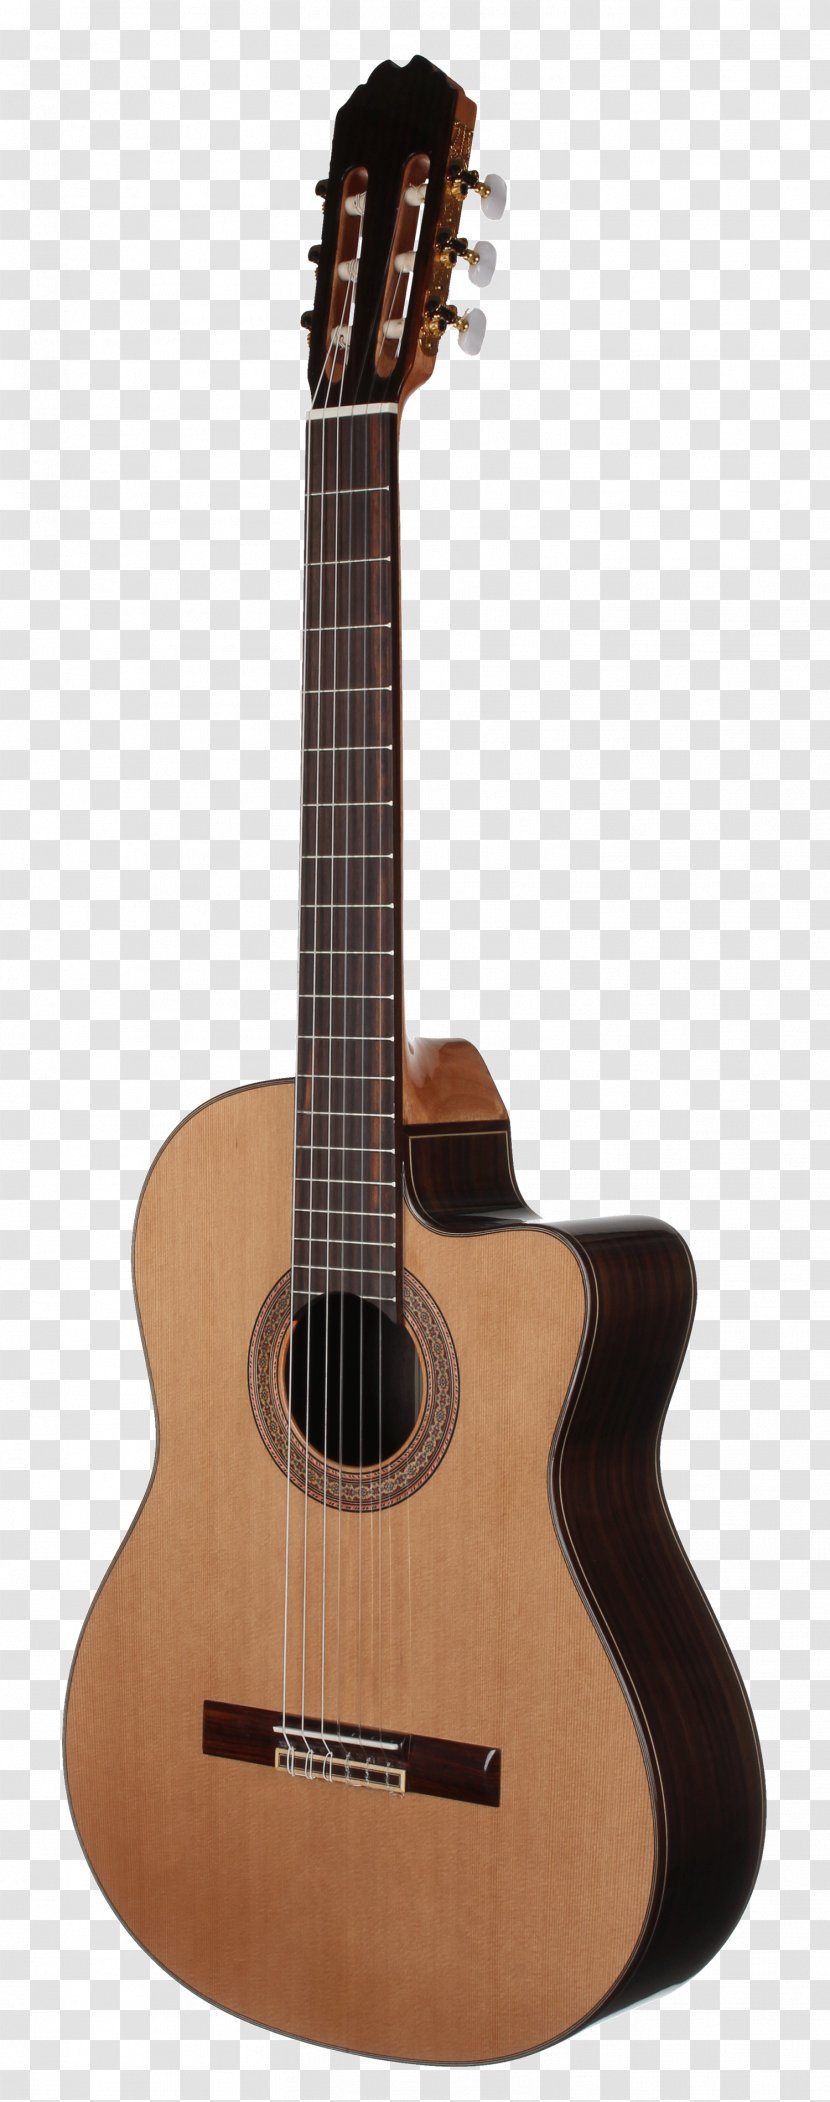 Taylor Guitars Classical Guitar Steel-string Acoustic Musical Instruments - Frame Transparent PNG